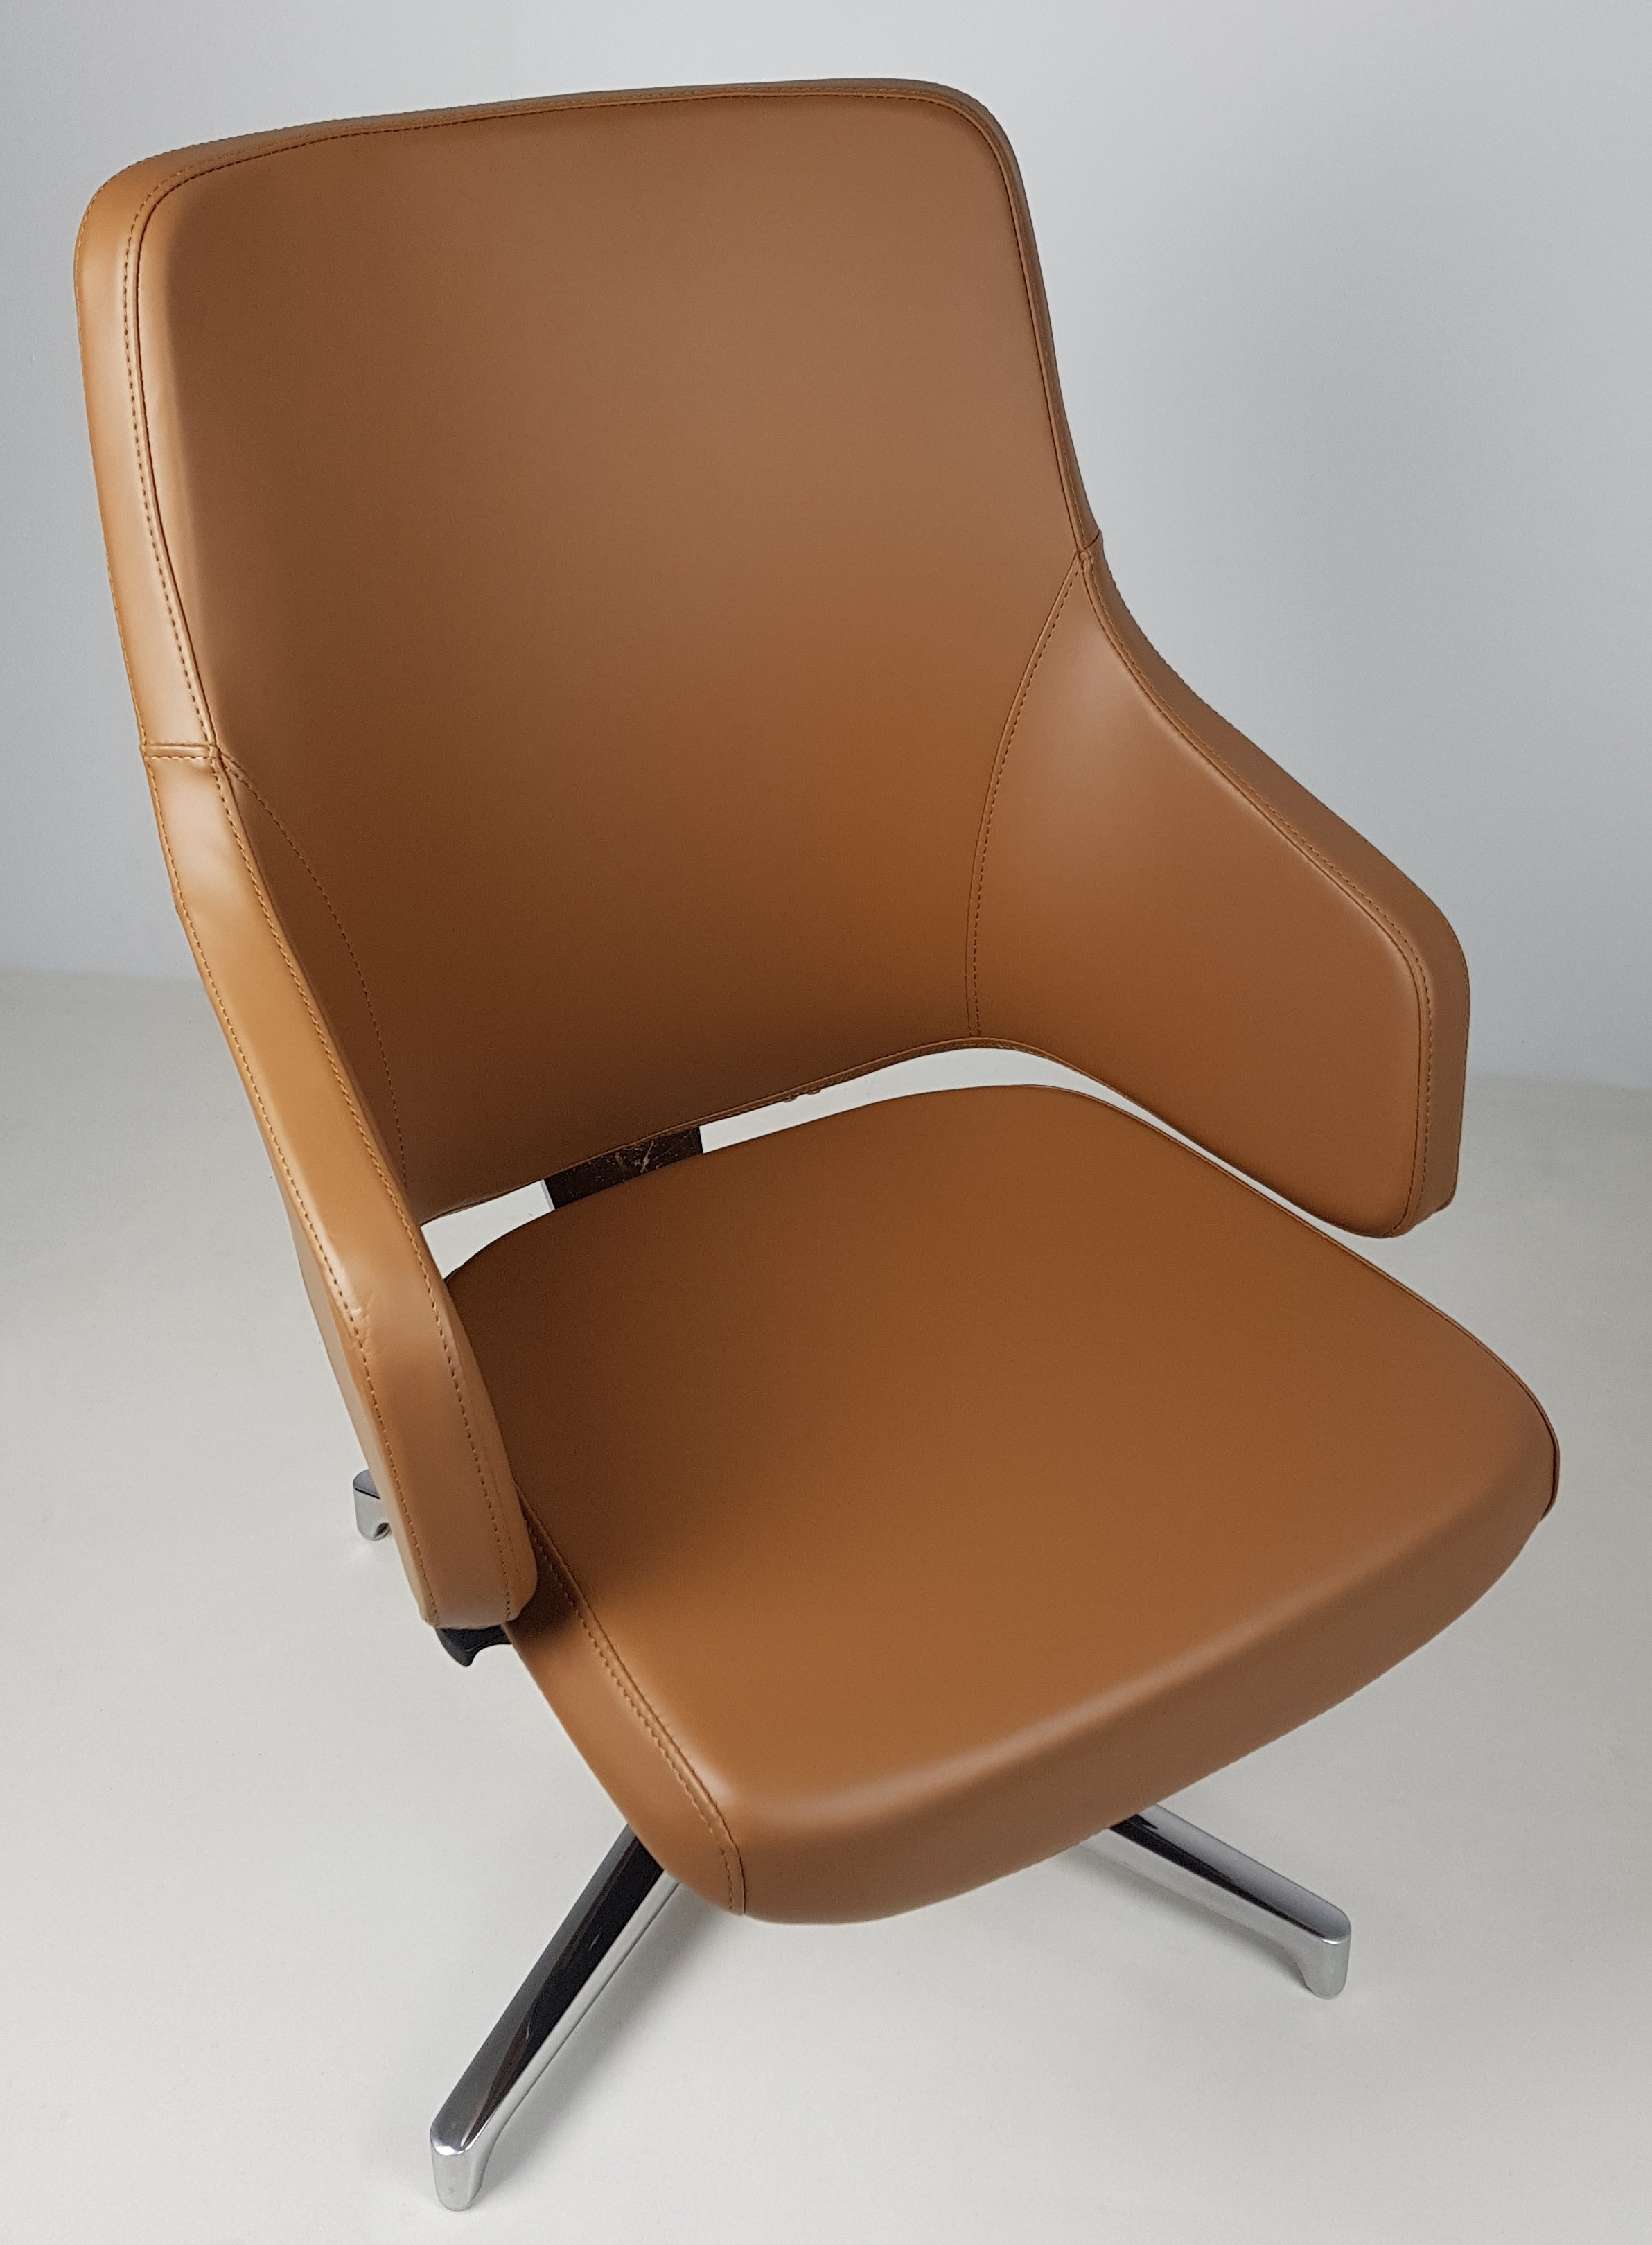 Tan Leather Visitor Office Chair with Seat Slide - CHA-1823C